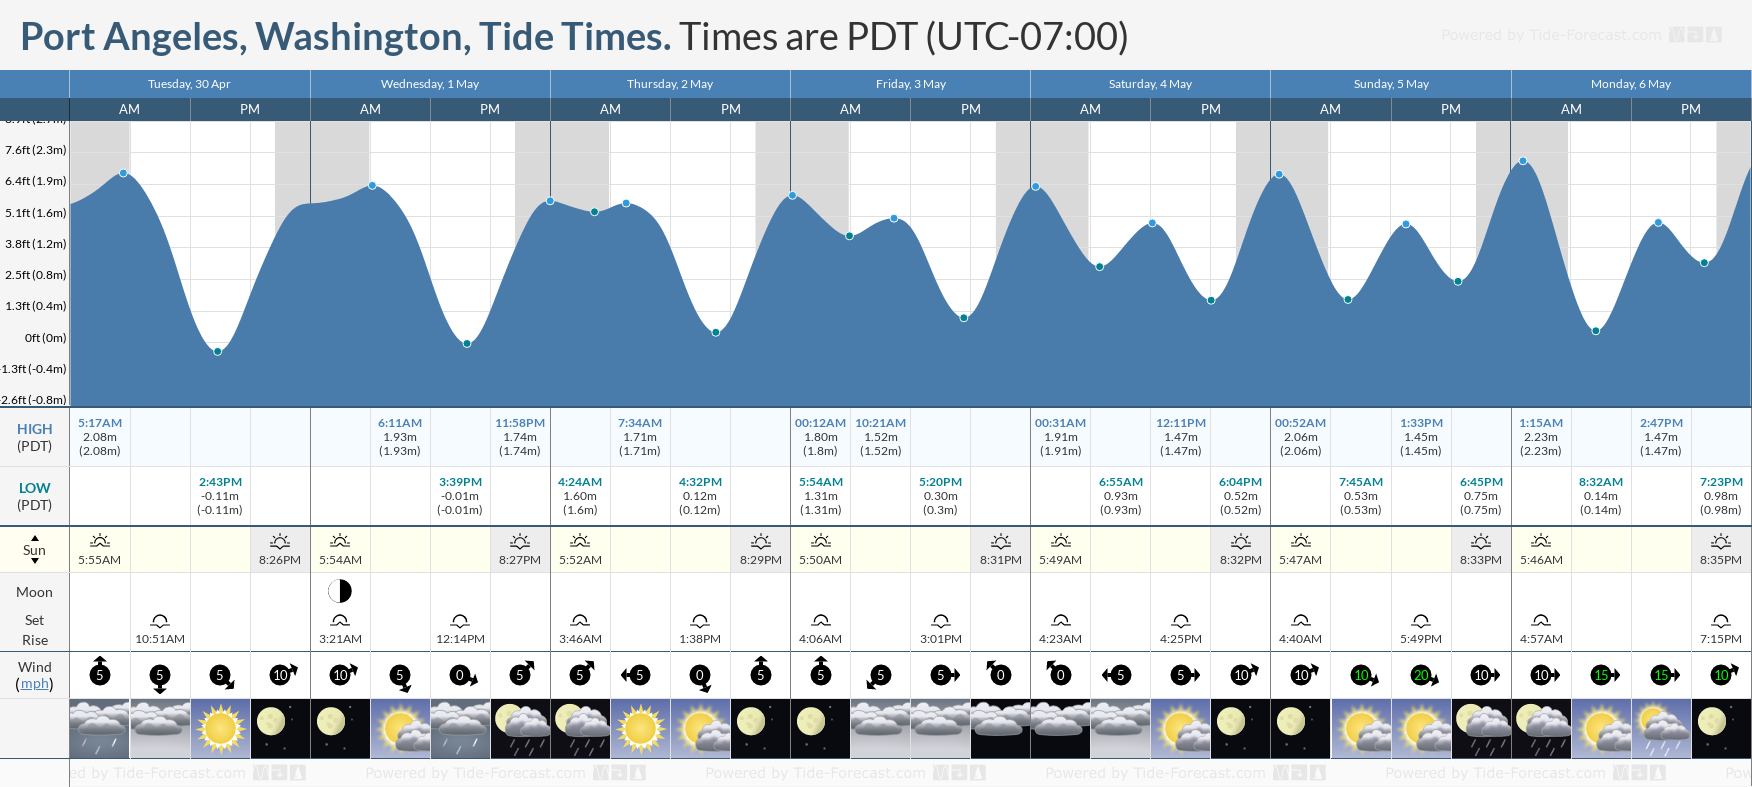 Port Angeles, Washington Tide Chart including high and low tide times for the next 7 days